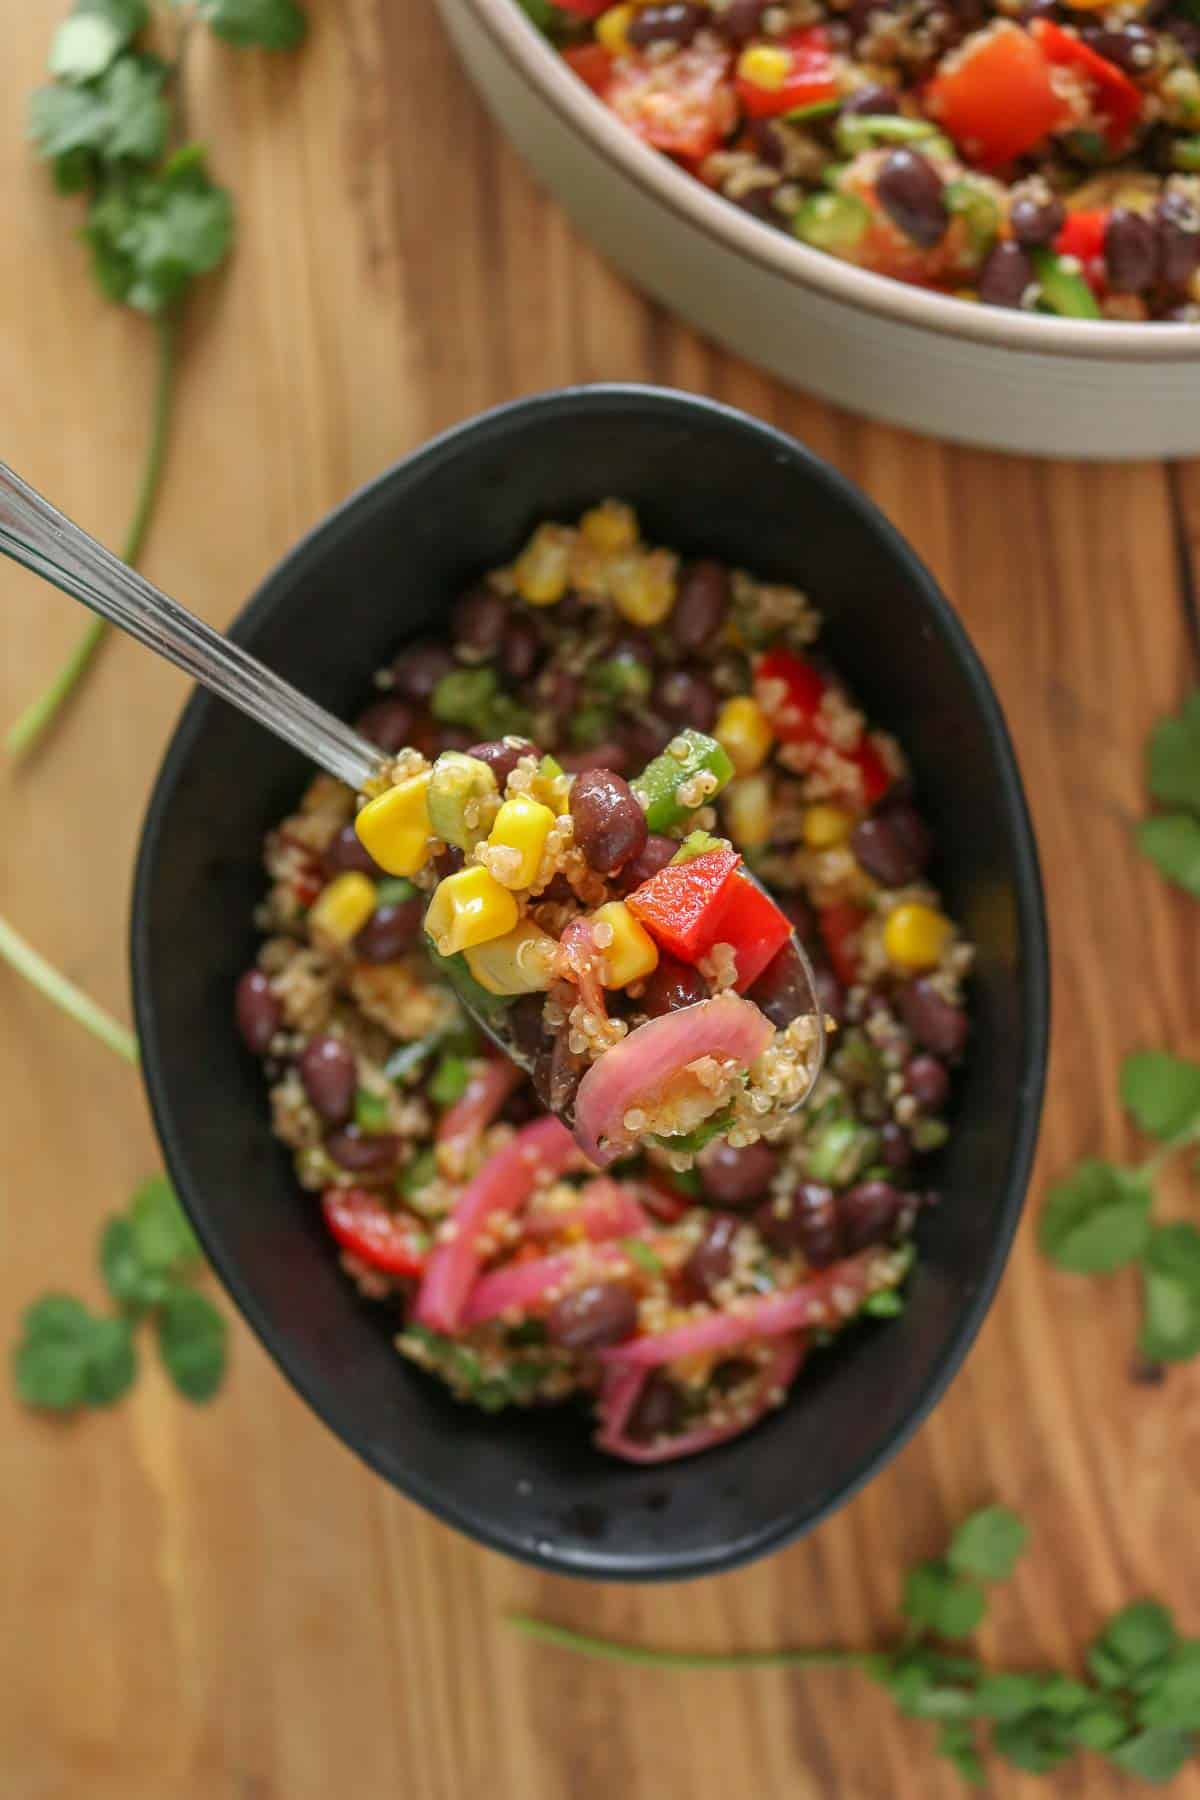 Spoonful of quinoa salad from a bowl.